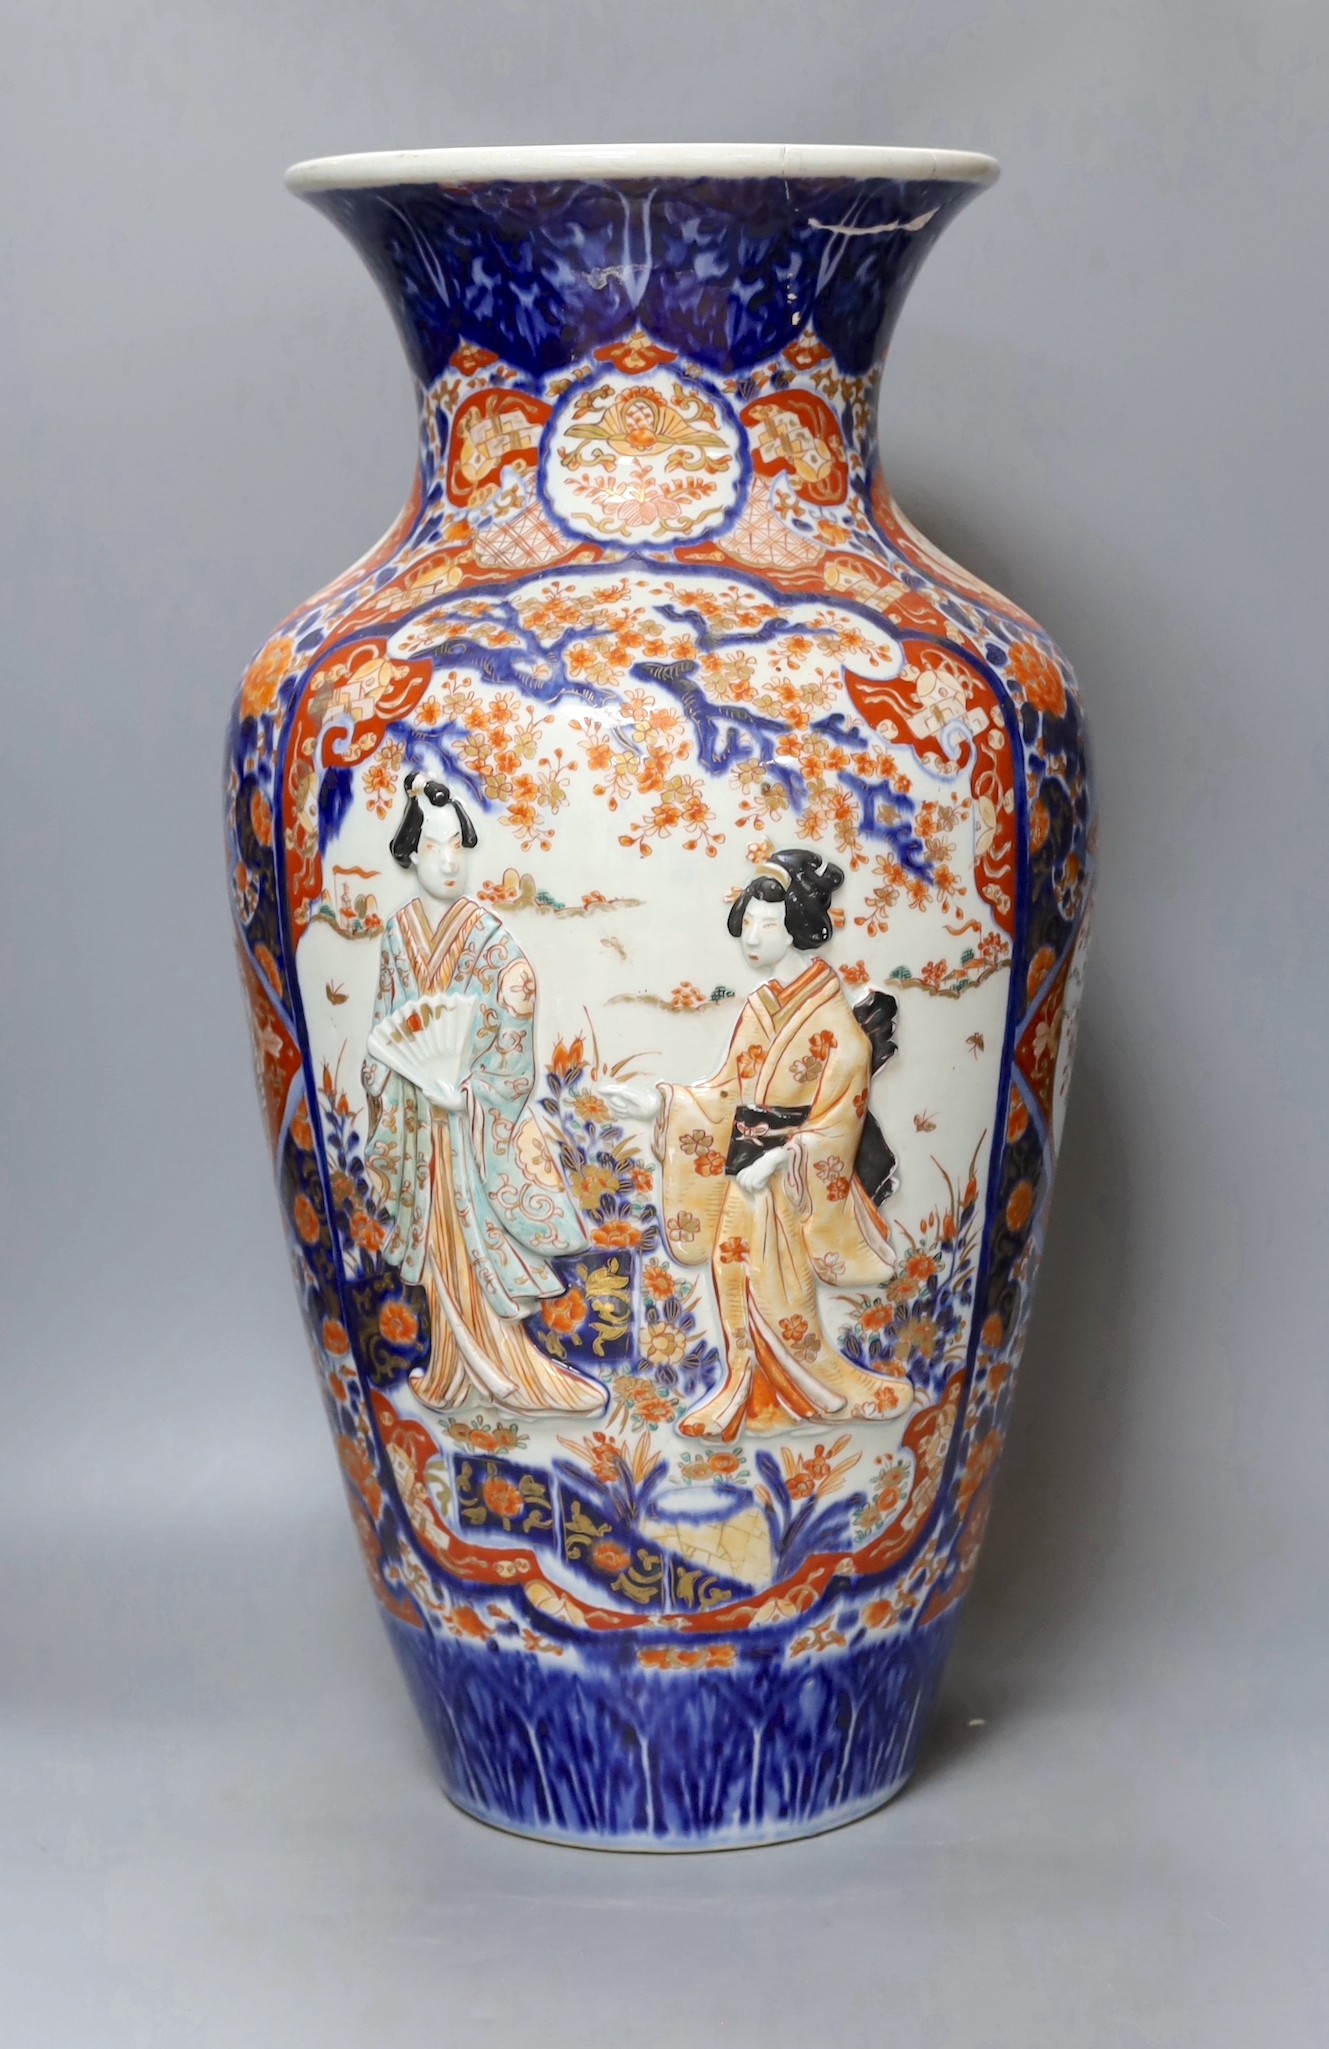 An unusual large Japanese Imari vase, Meiji period relief moulded with figures, 57cm tall,